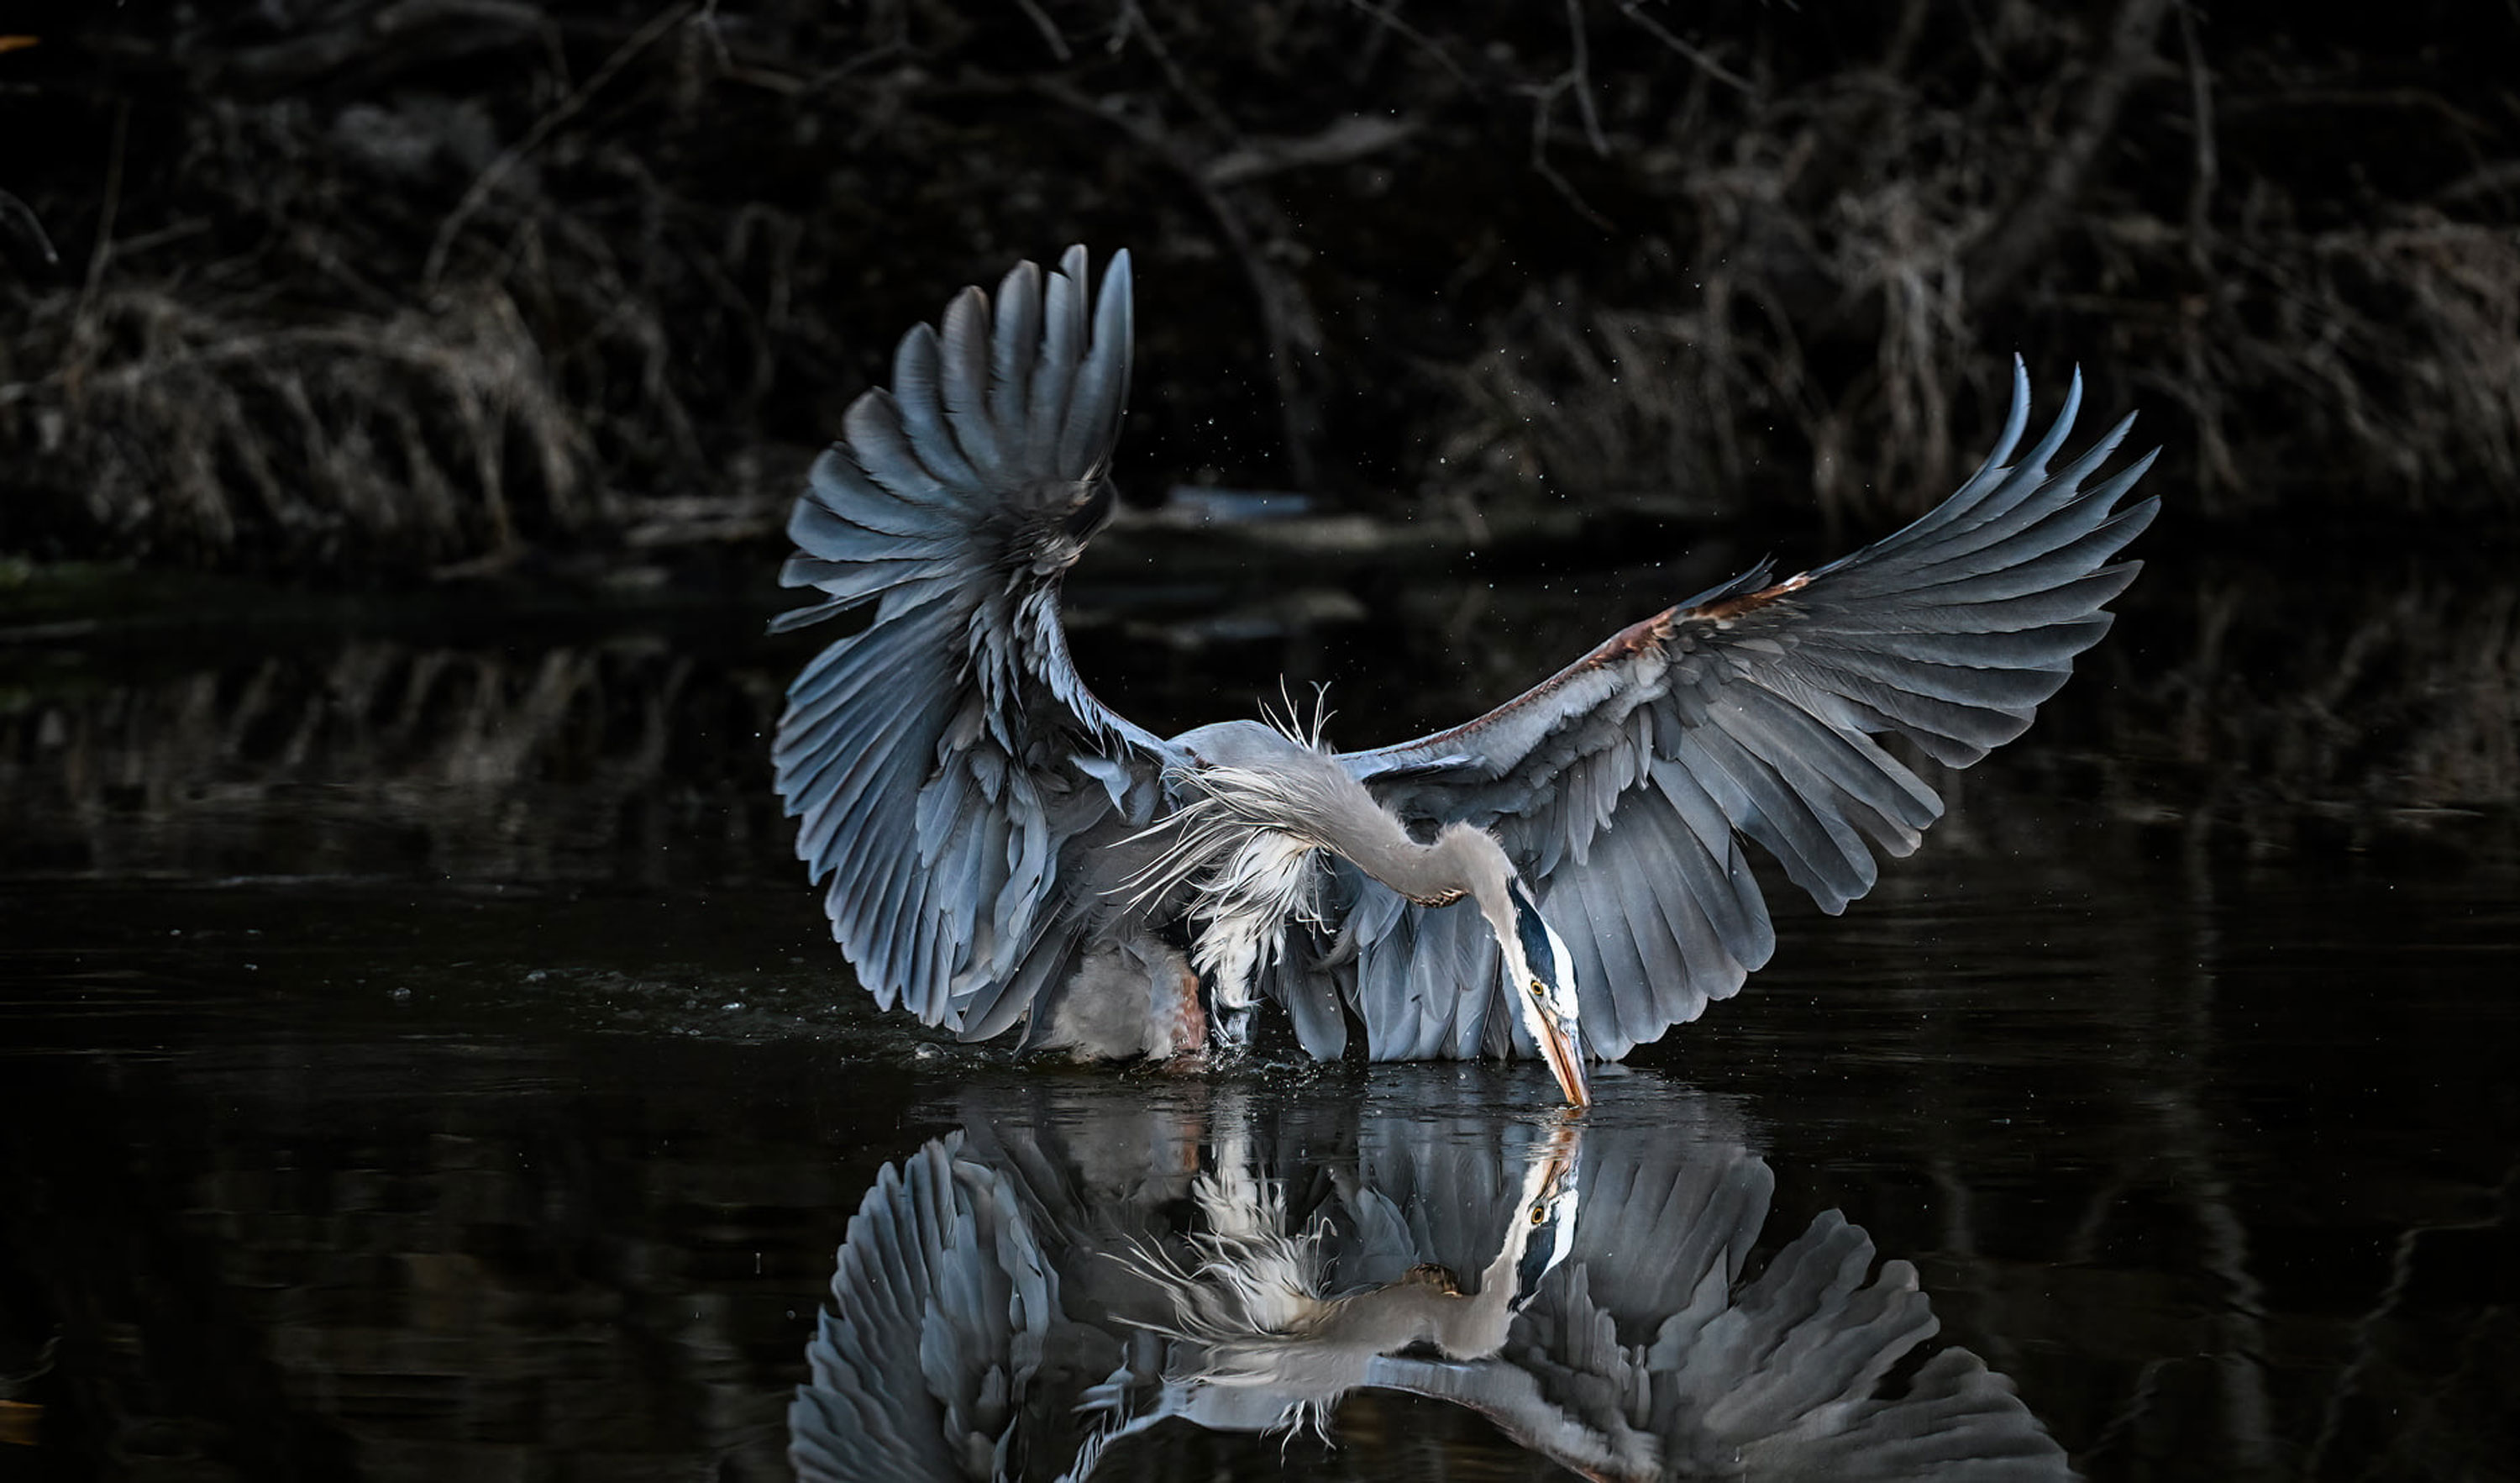  A great blue heron diving into water to catch a fish